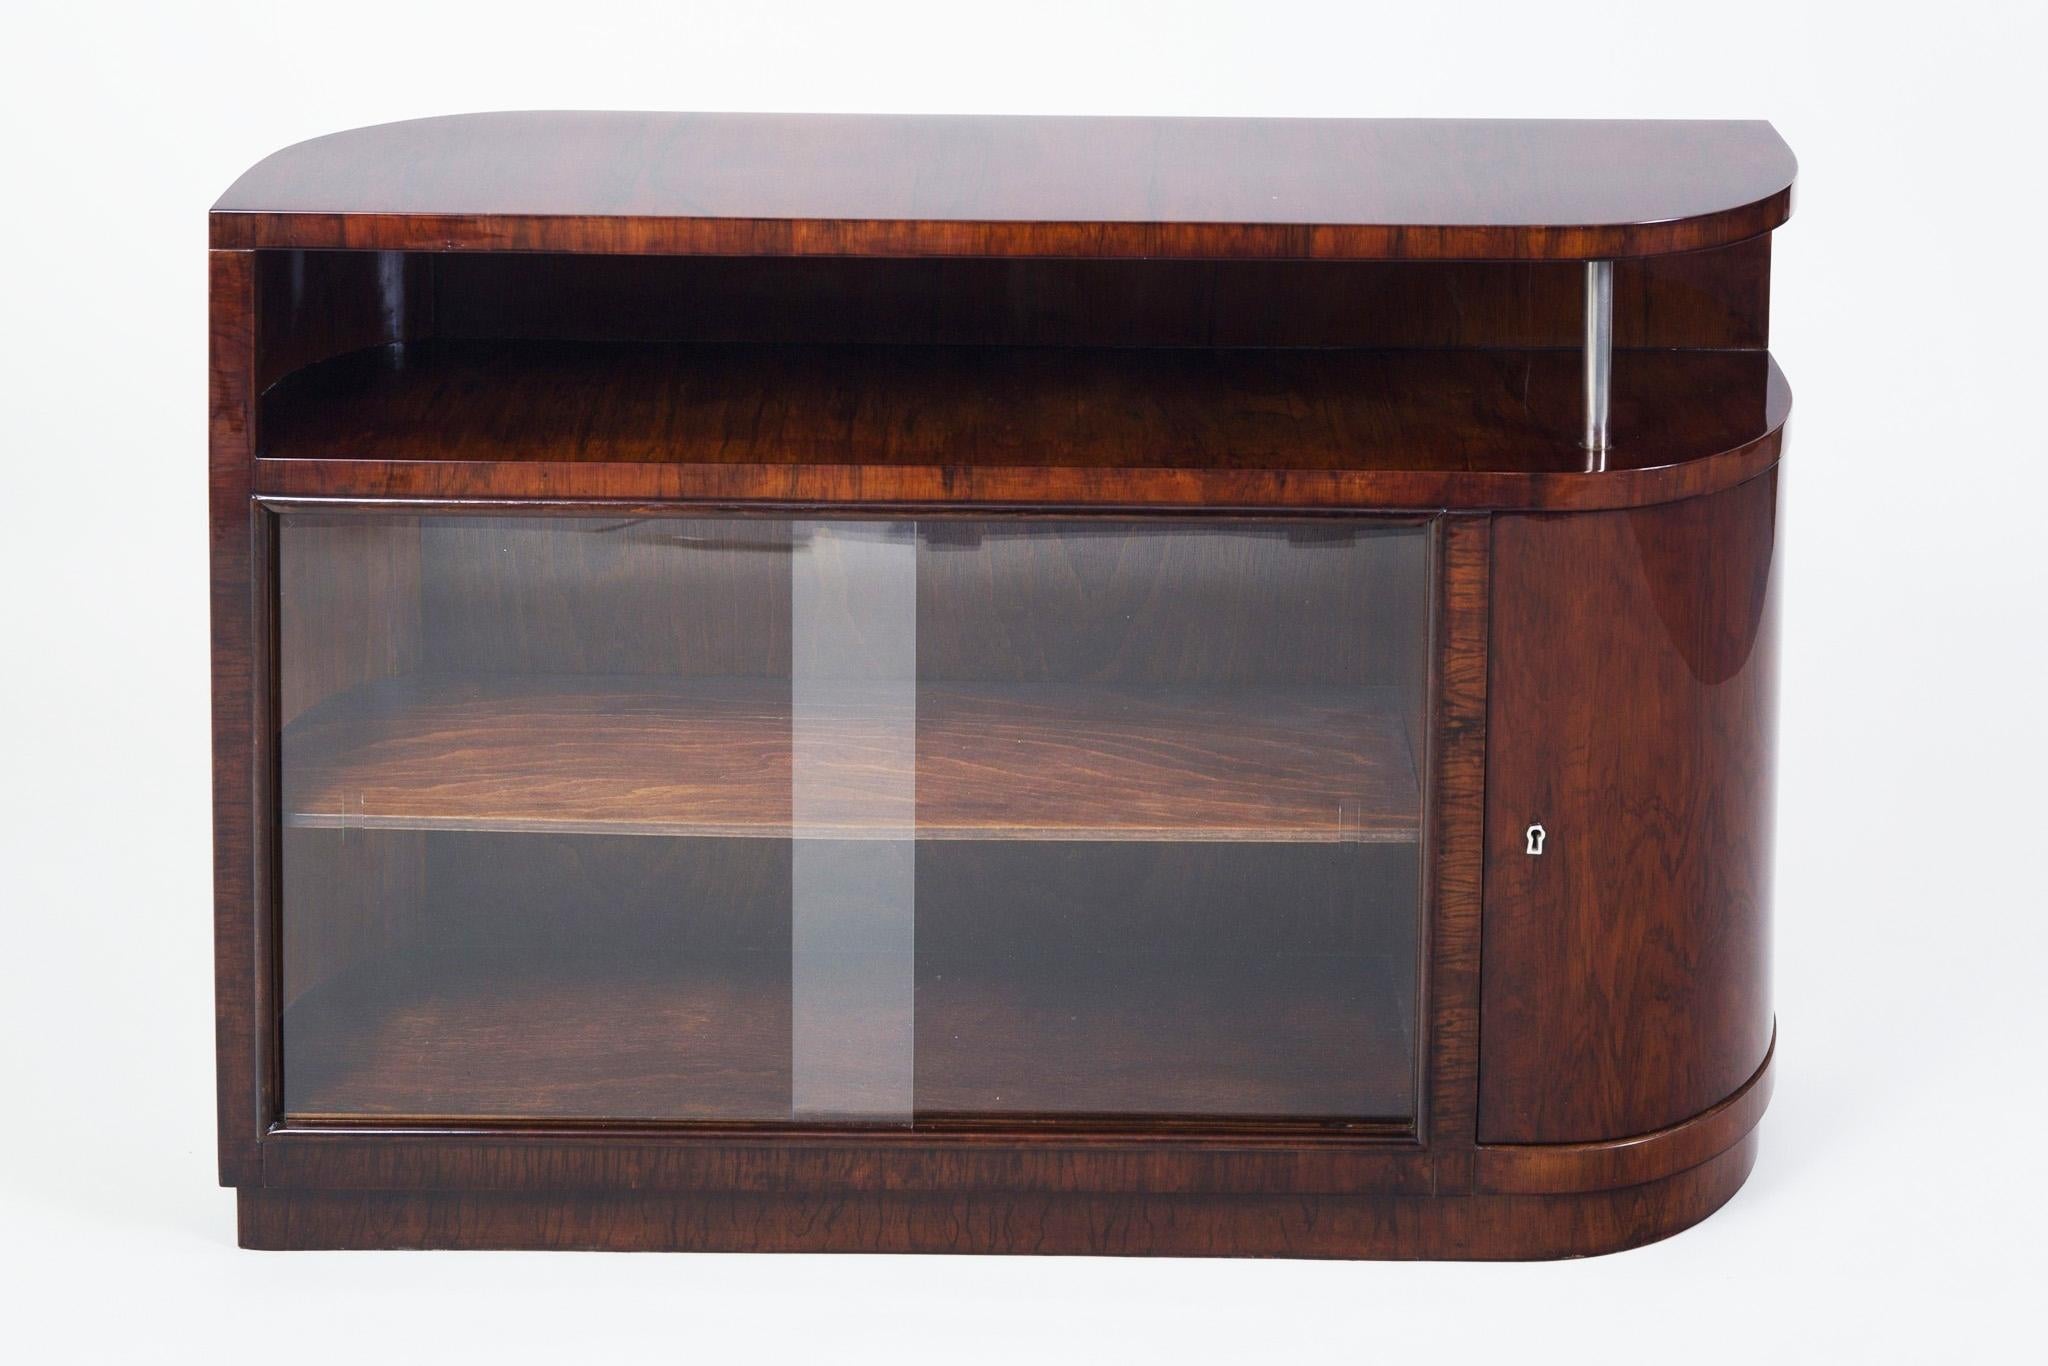 Art Deco cabinet with shelves from Czech Republic.
Period: 1930-1939.
Material: Palisander
Completely restored and the surface was made by piano lacquers to the high gloss.